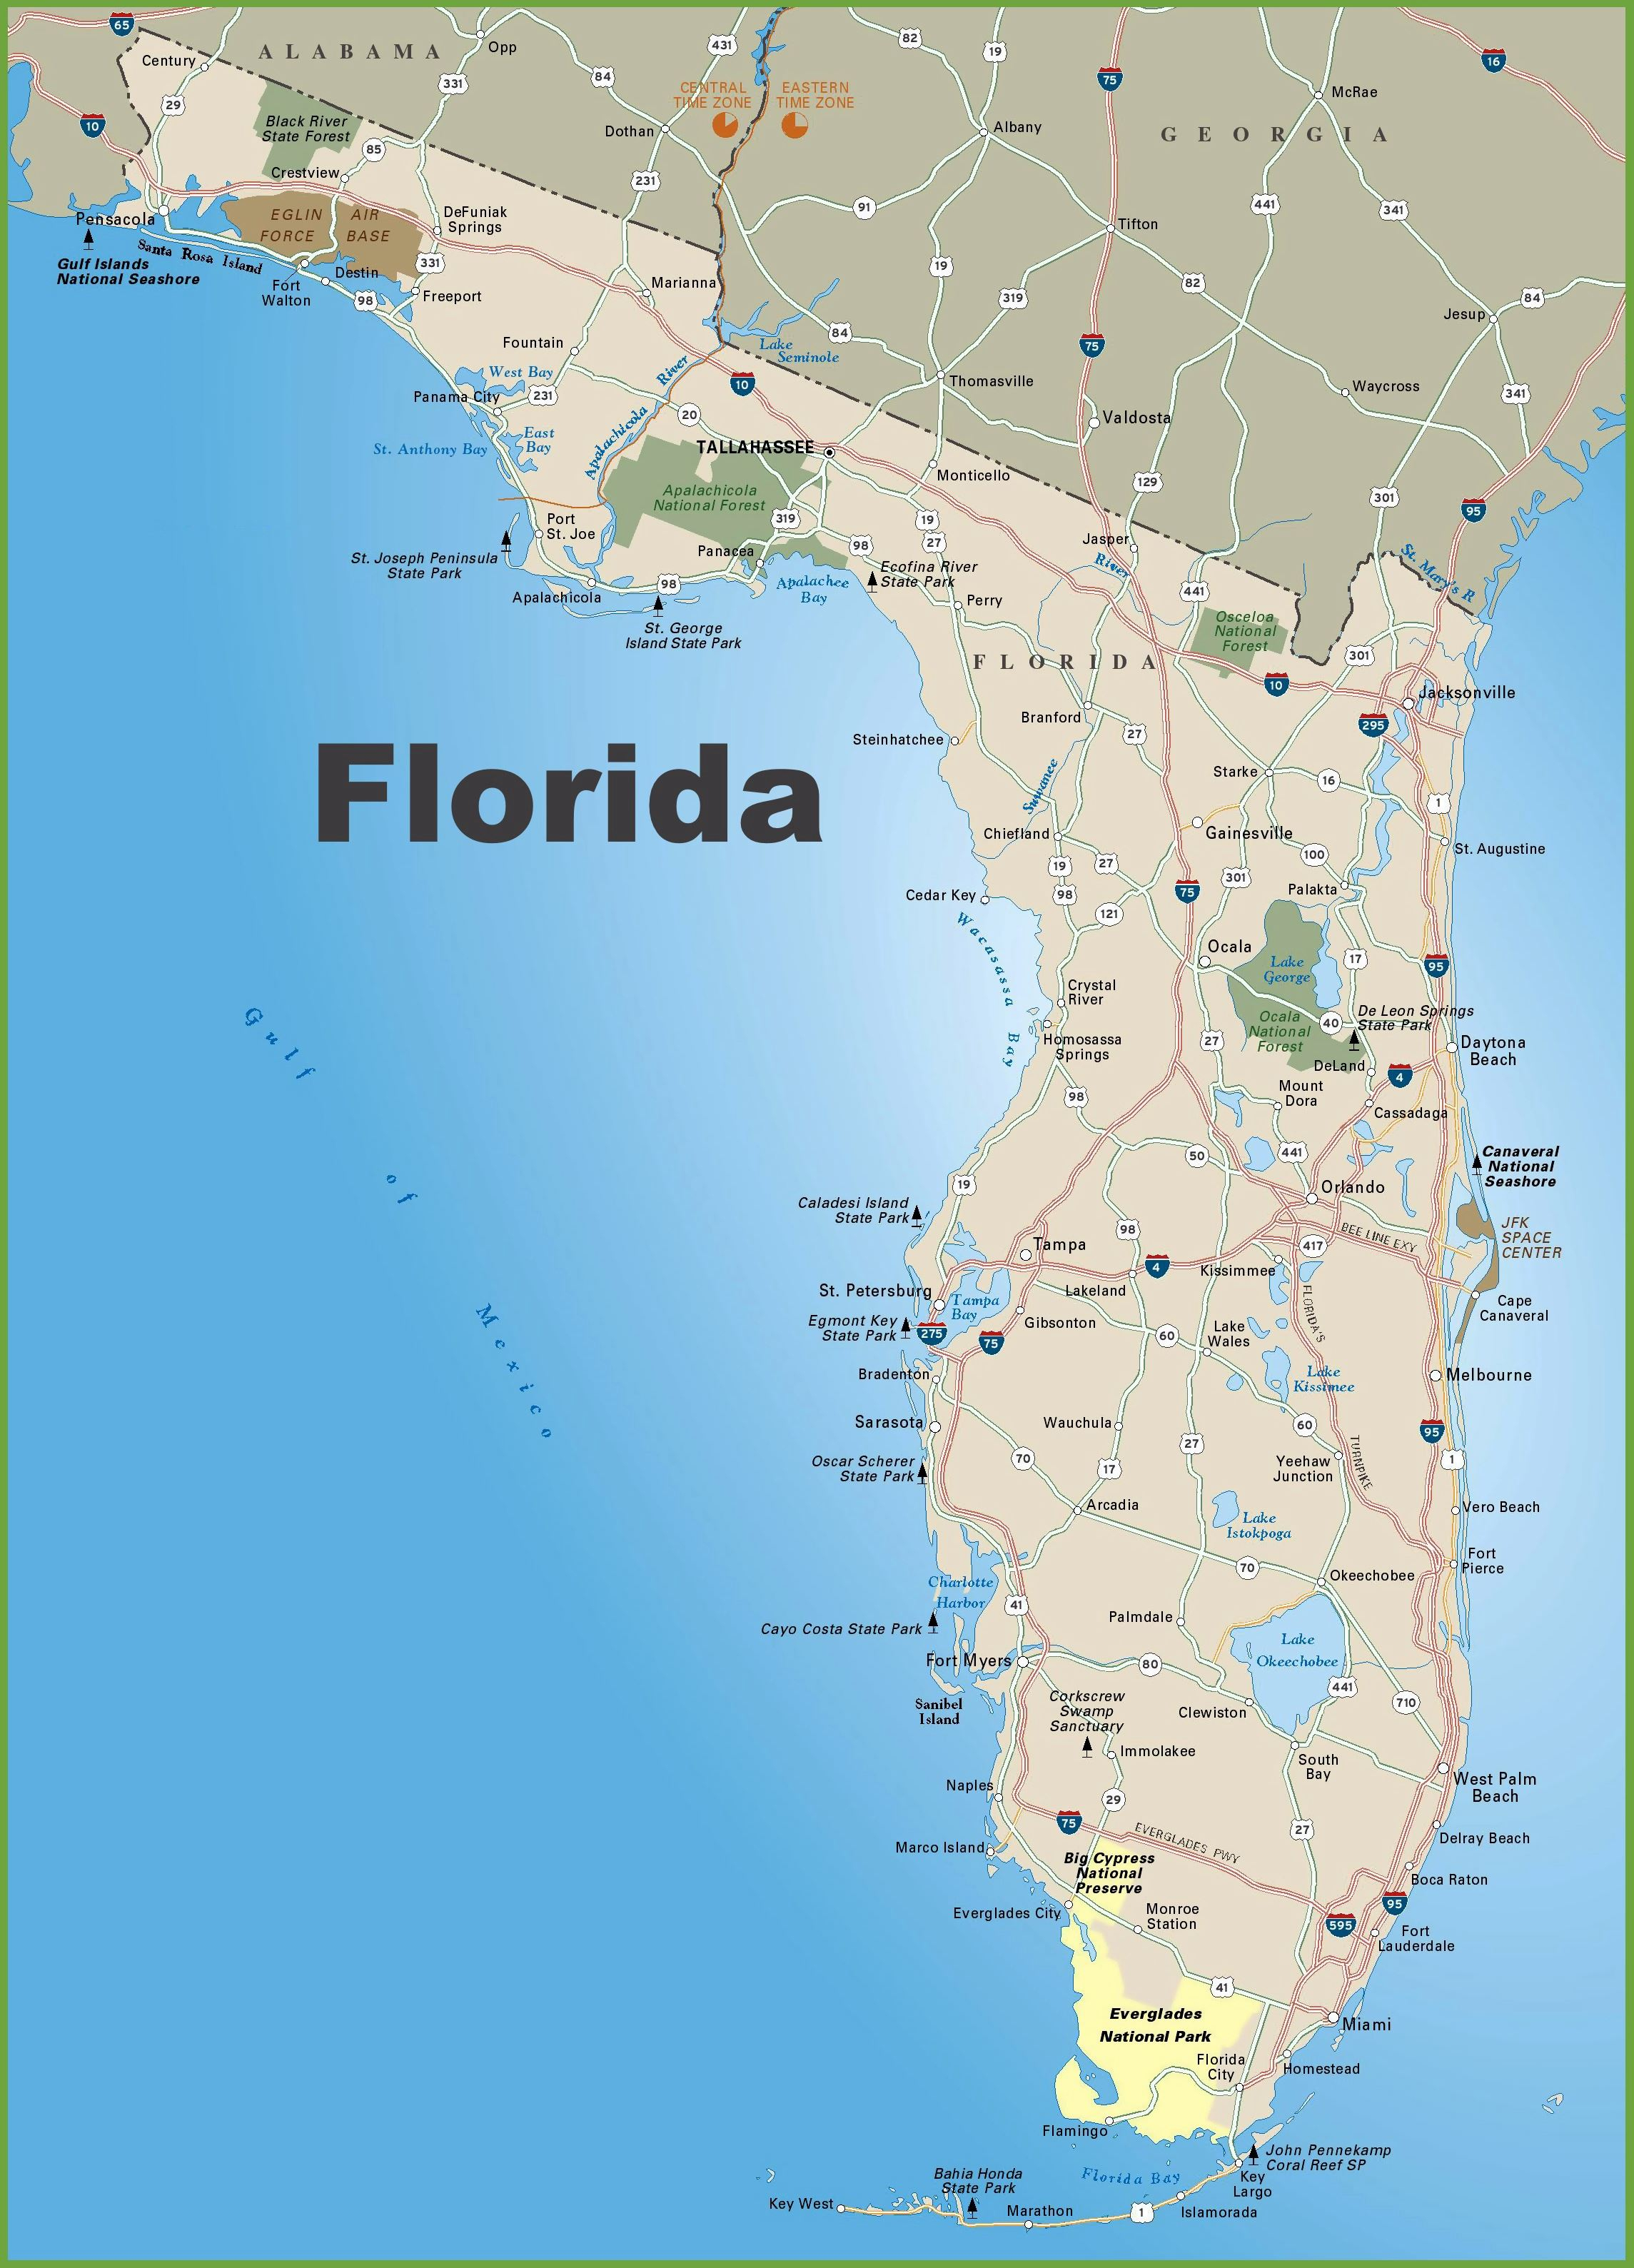 Large Florida Maps For Free Download And Print | High-Resolution And - Map Of Florida West Coast Beaches